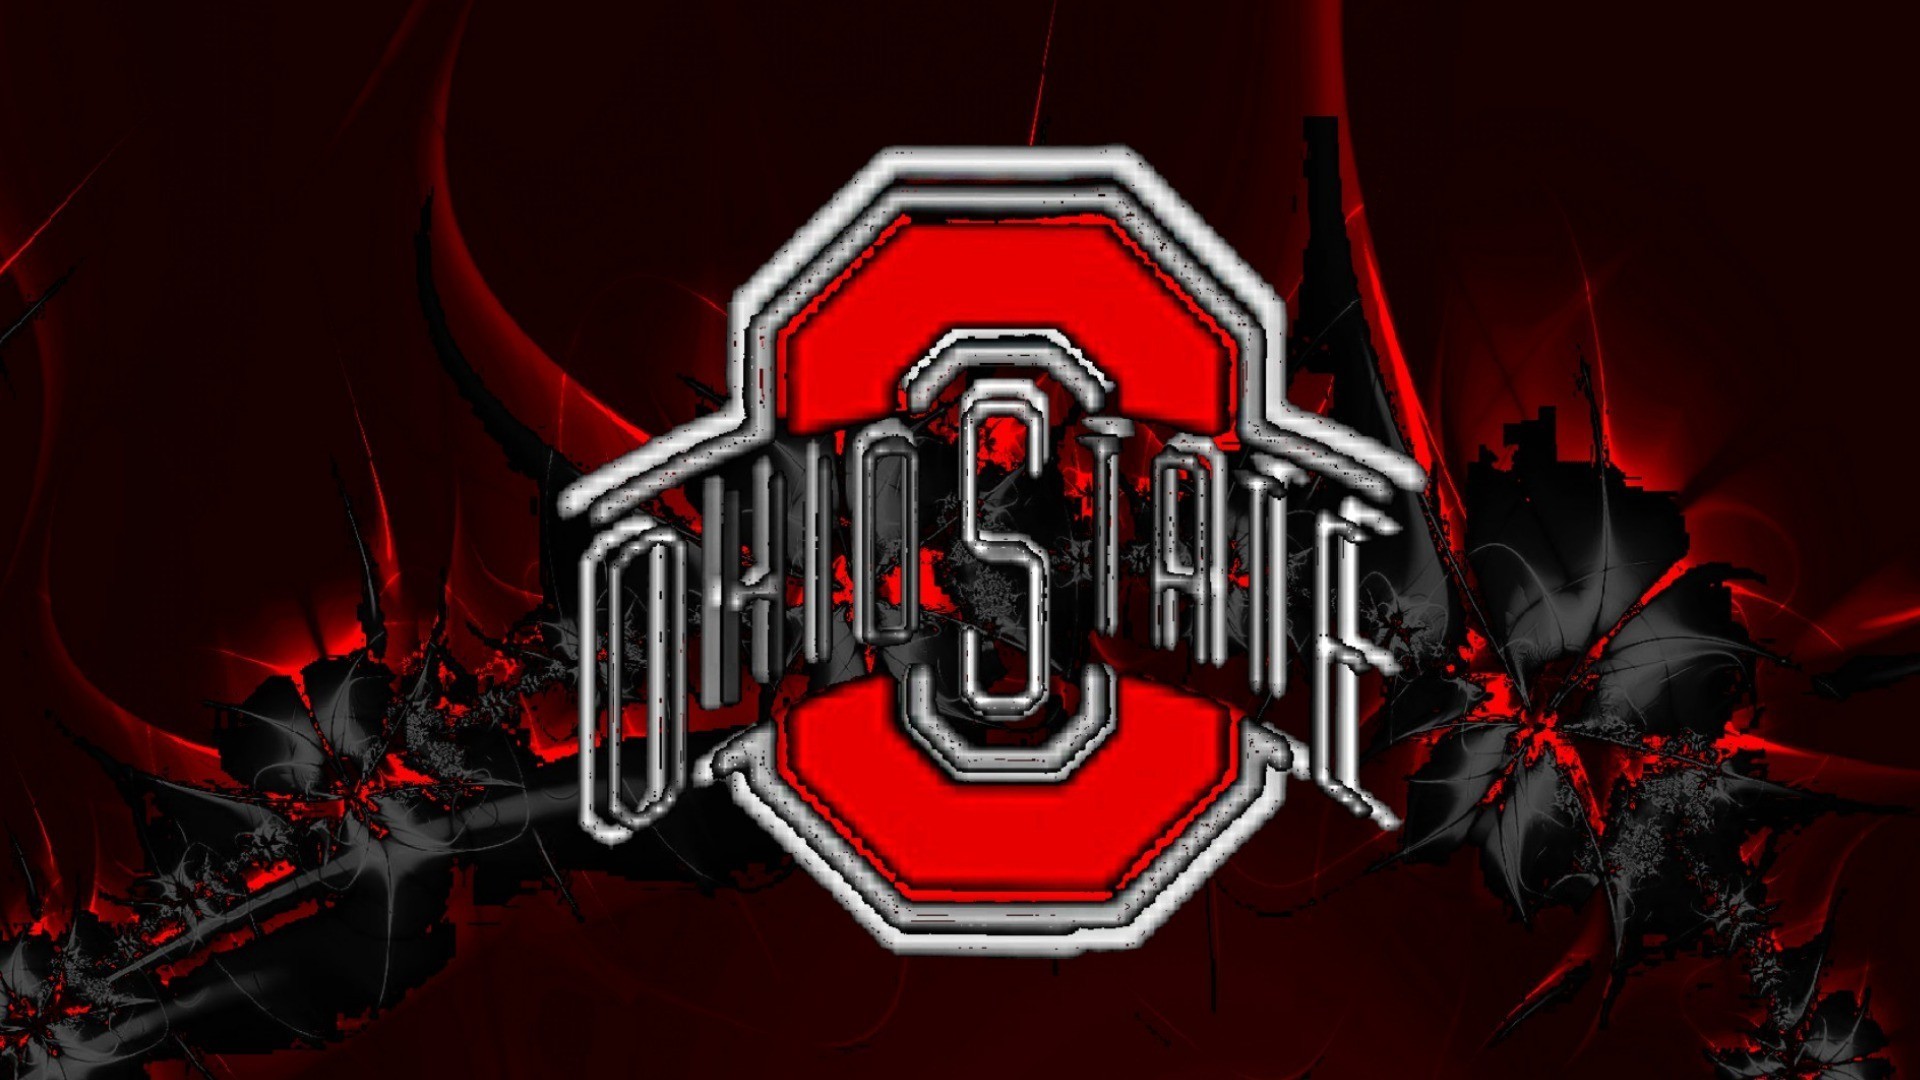 1920x1080 Ohio State Buckeyes Wallpapers Download.